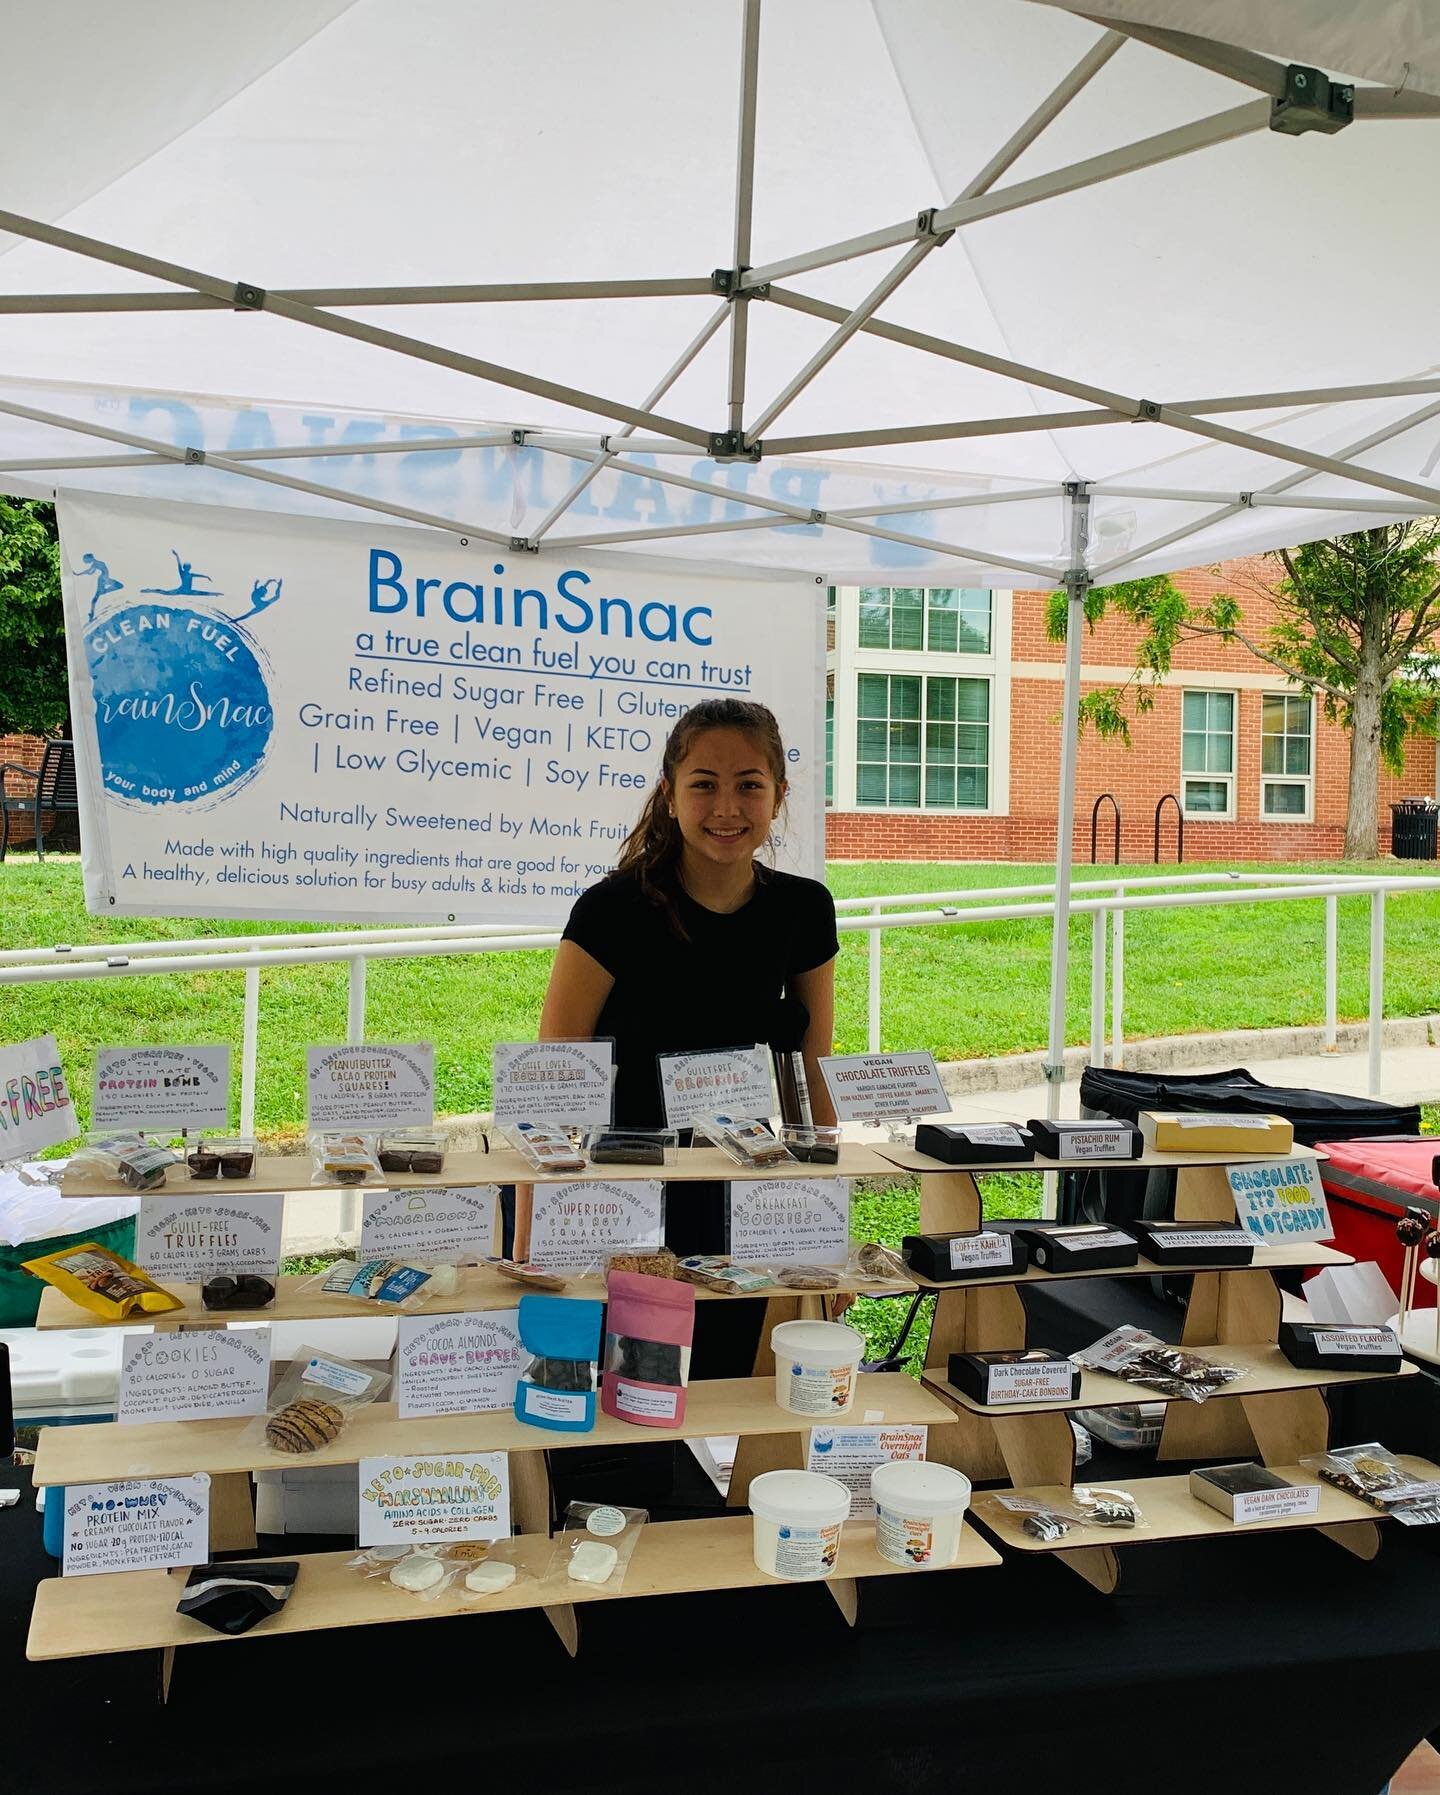 Come to see us at Westover farmers market 8-12 on this beautiful June Sunday morning for some delicious healthy BrainSnacs!🌹❤️

 #KETO, #Vegan, #glutenfree, #refinedsugarfree #plantbased, #grainfree, #lowglycemicindex, #soyfree, #transfatfree, #pres